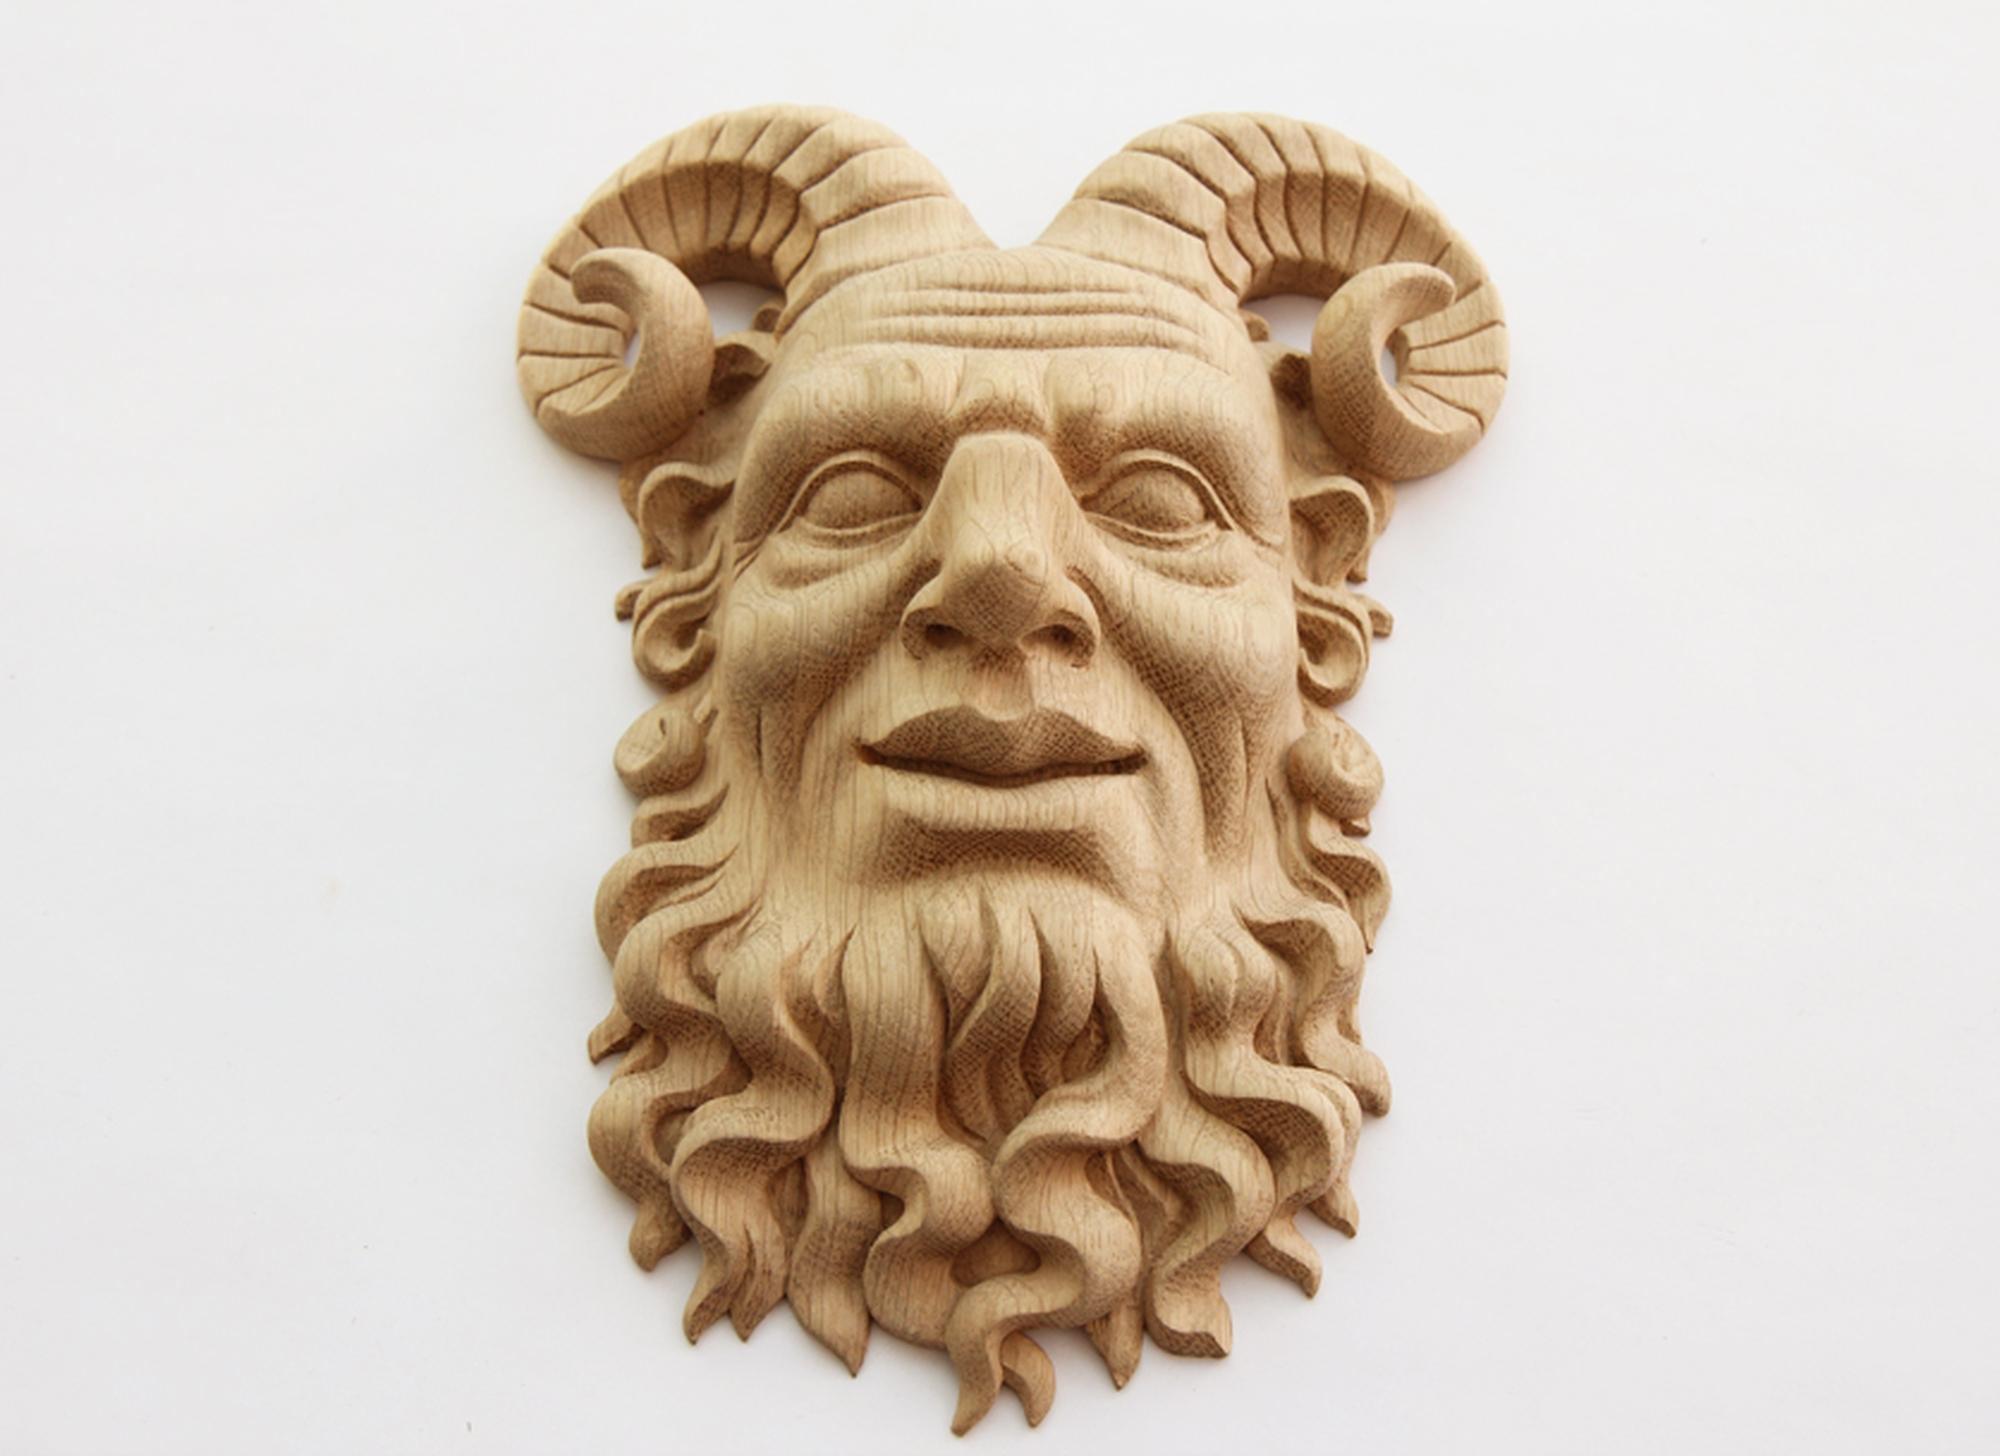 Woodwork Satyr Antique Mask 'Wood Rosette' Hand Carving Craft Wall Art from Oak or Beech For Sale